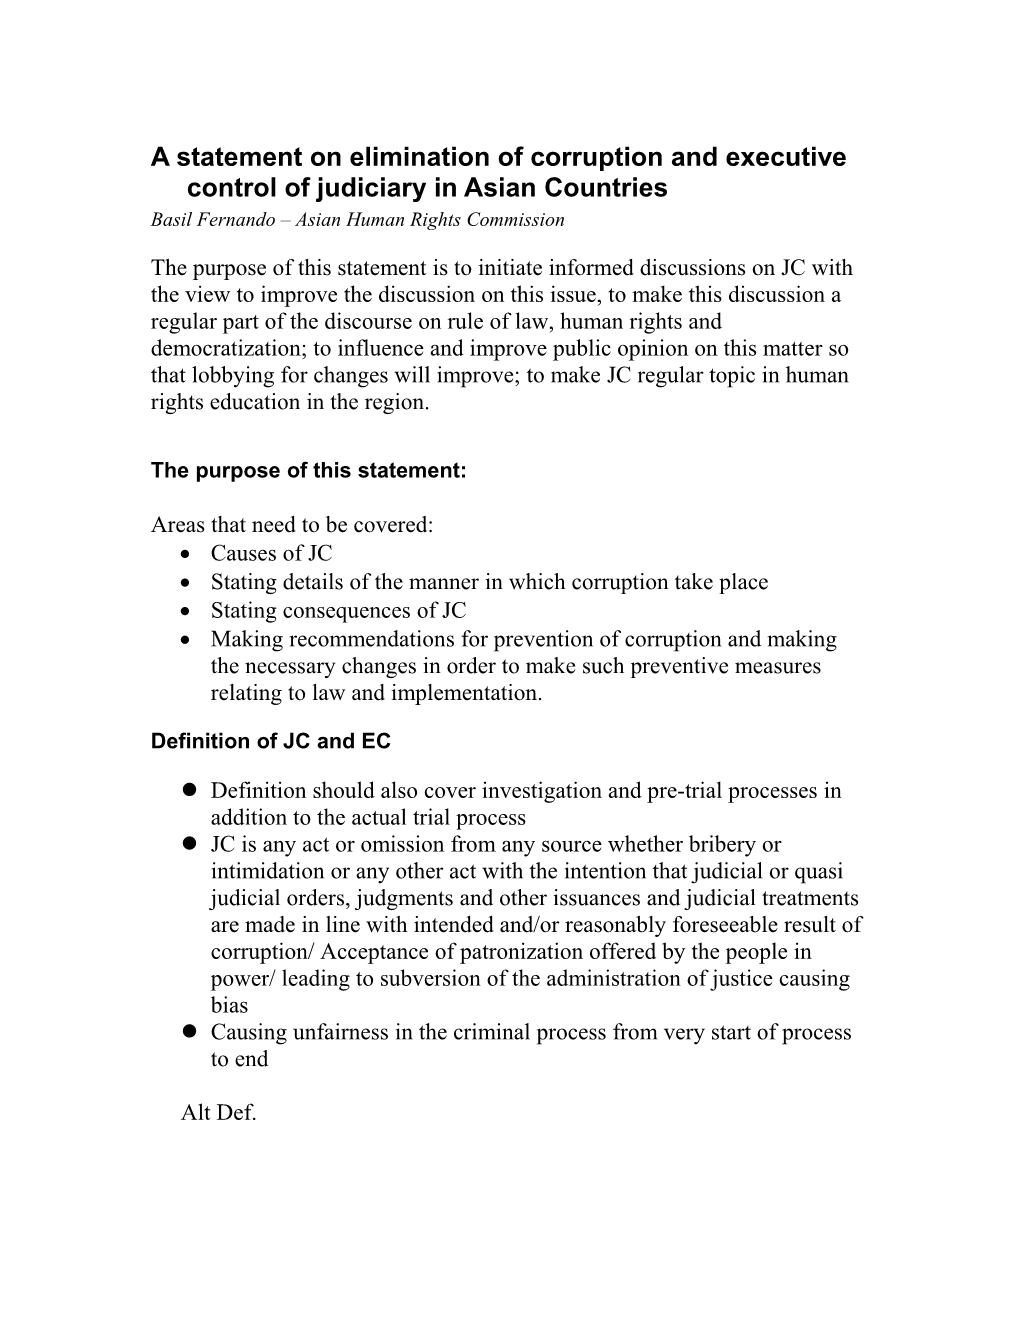 A Statement on Elimination of Corruption and Executive Control of Judiciary in Asian Countries